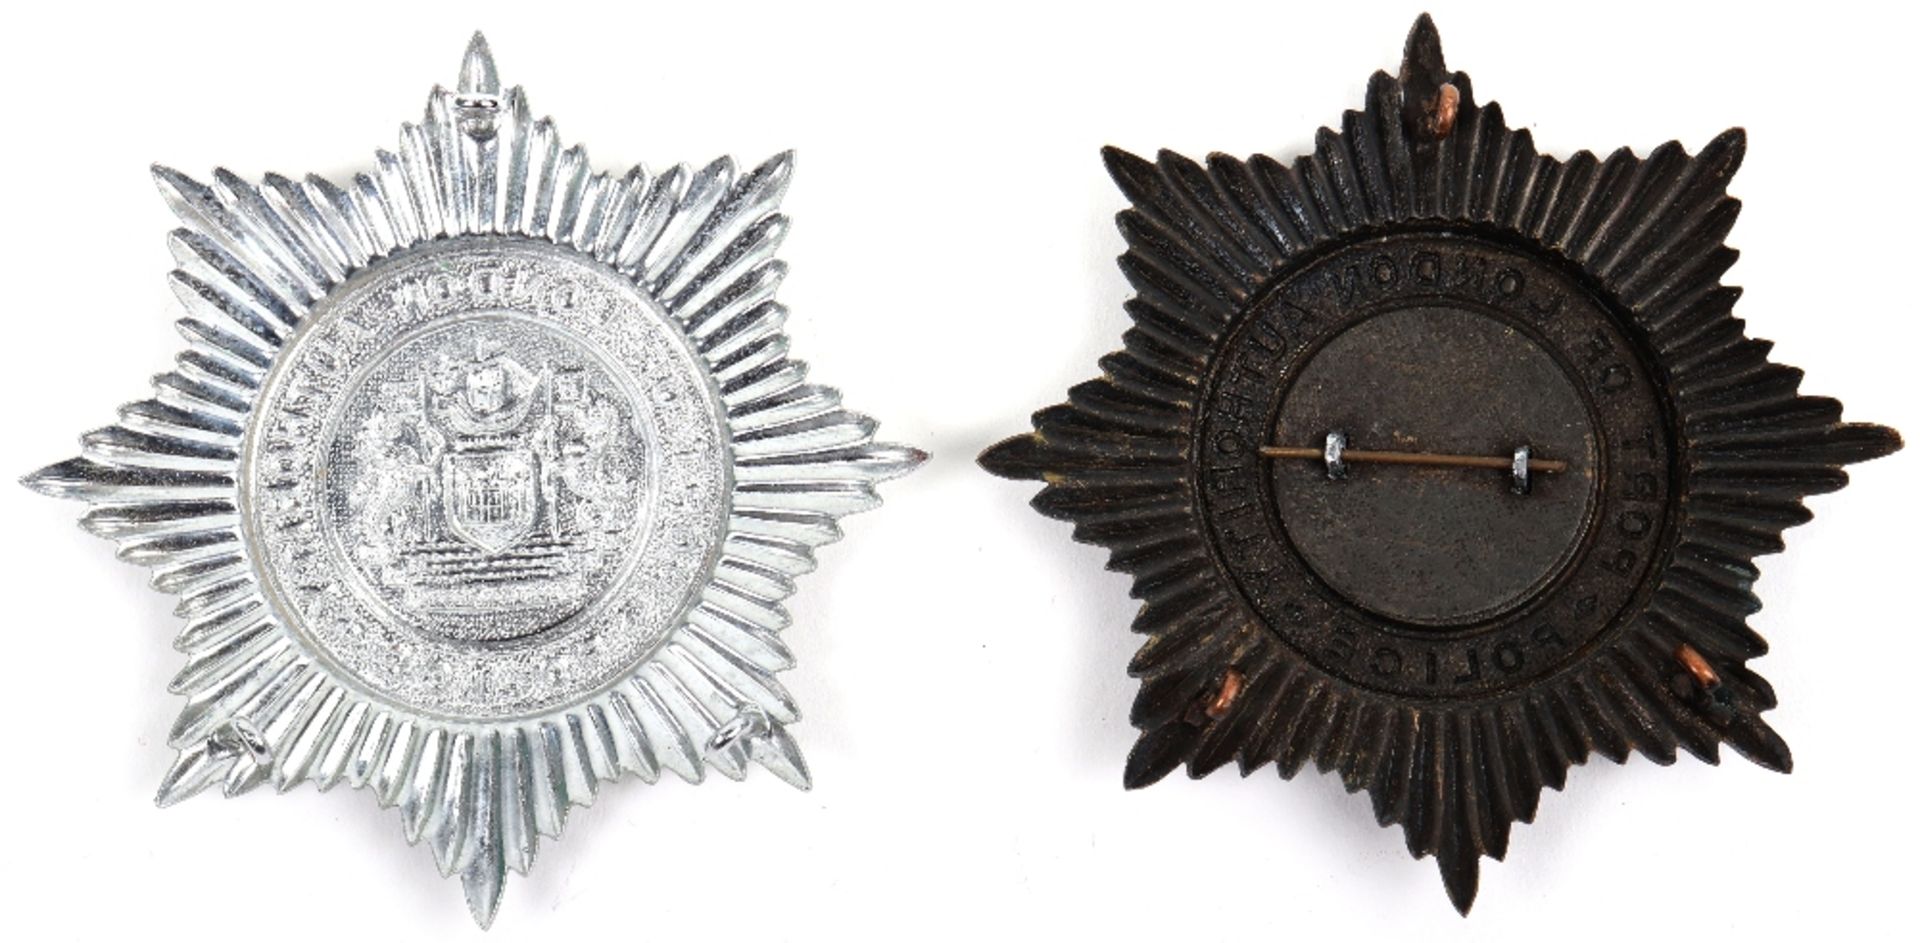 Two Port of London Authority Police Helmet Badges - Image 2 of 2